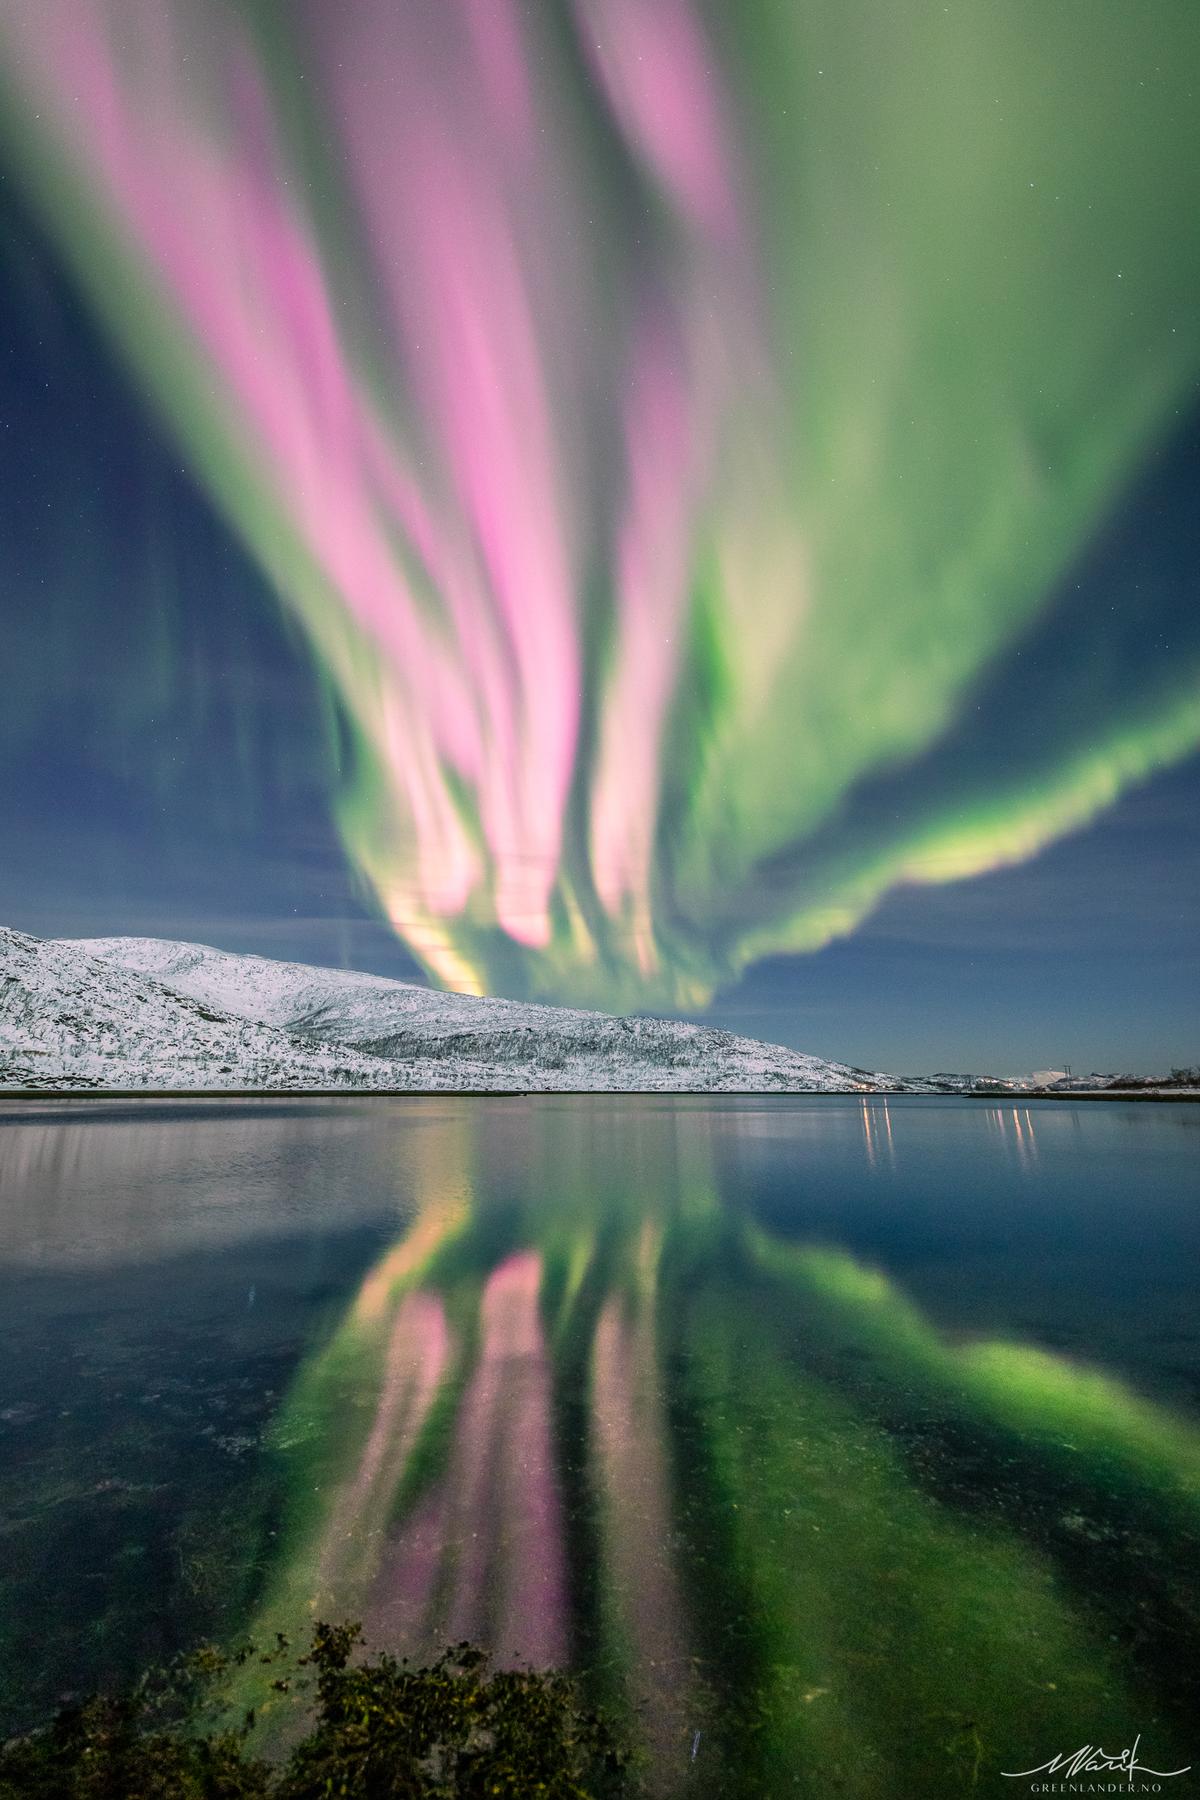 A pink and green aurora borealis appears reflected on water and in the skies overhead on Dec. 10, 2022. (Courtesy of <a href="https://www.facebook.com/greenlandertromso">Markus Varik</a>)